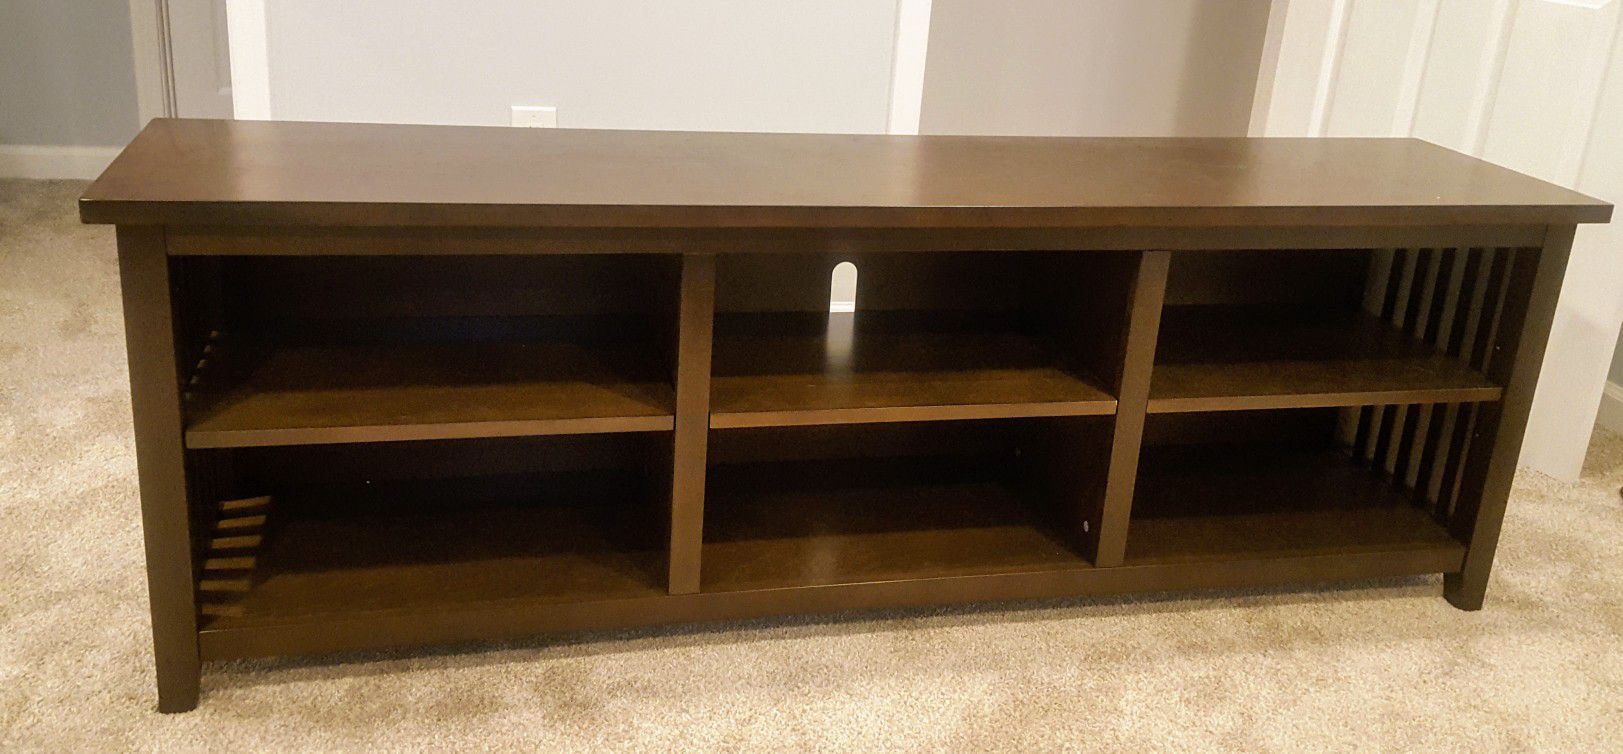 TV Stand - must go!